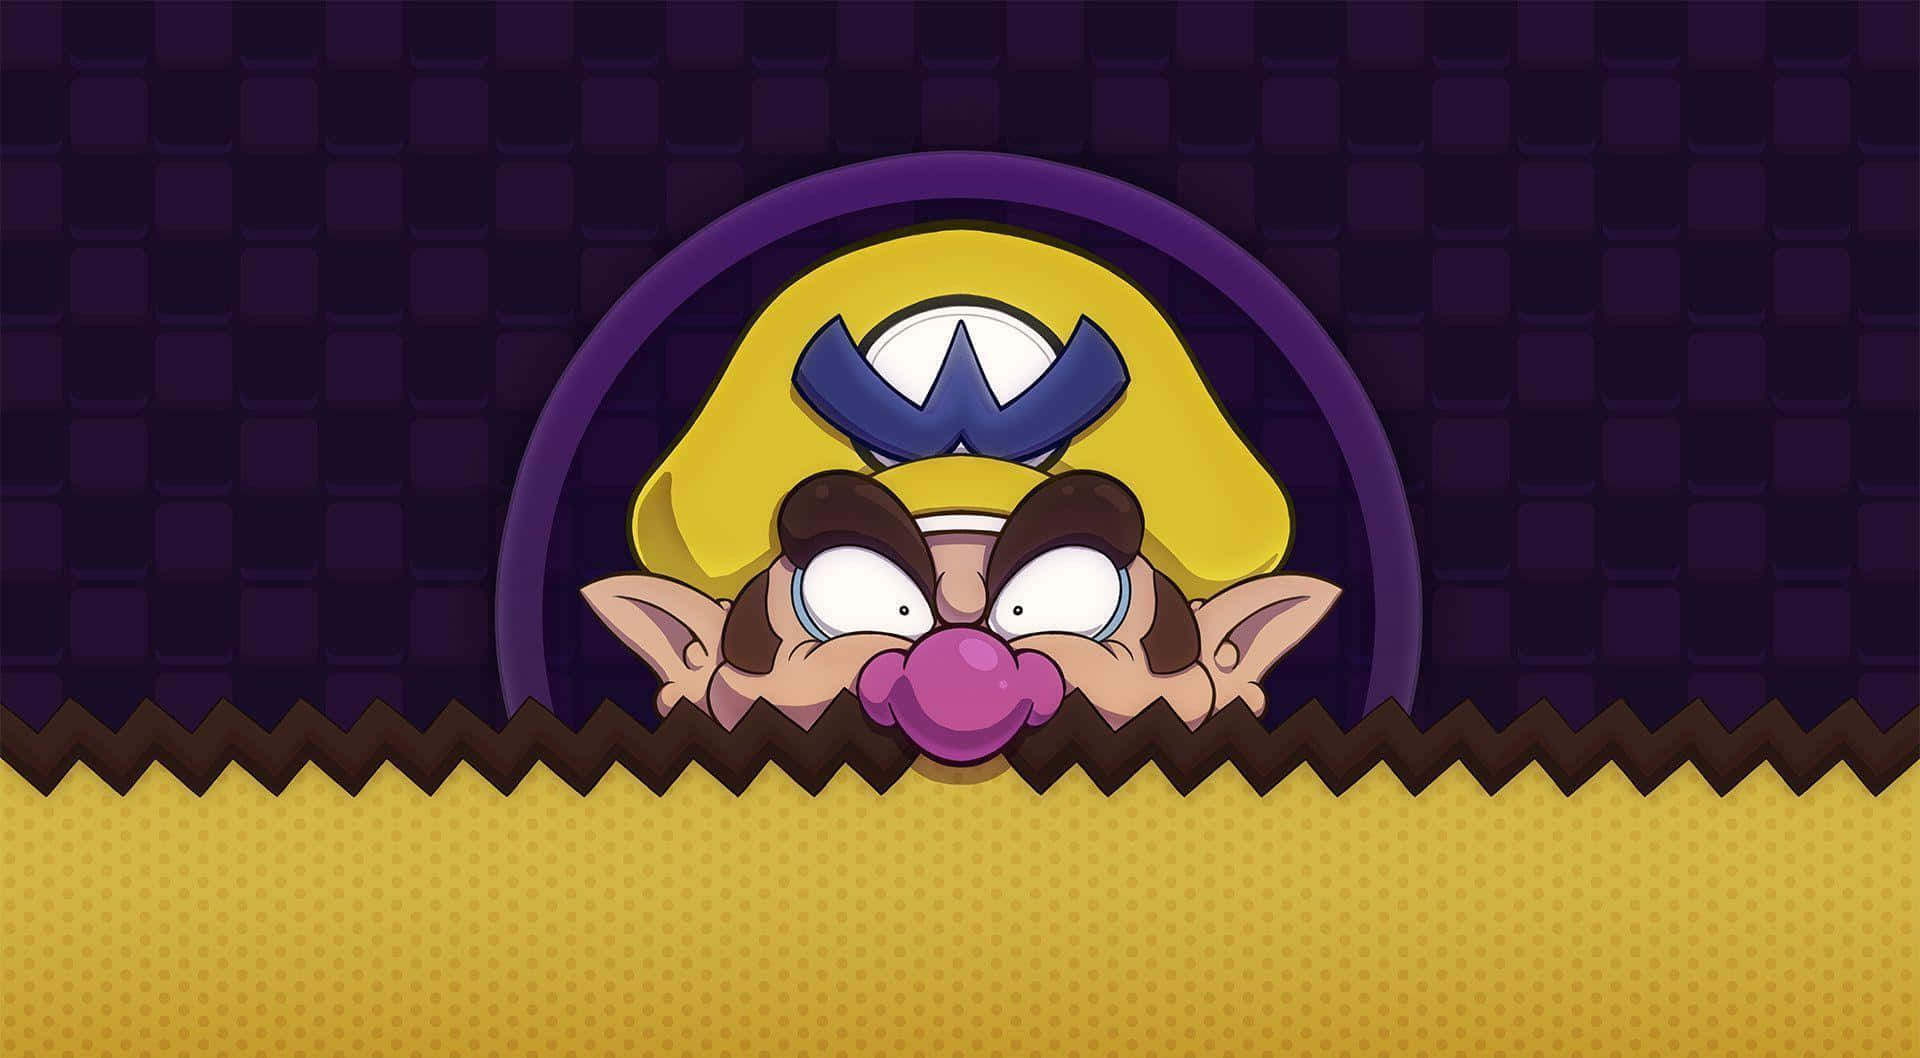 Wario smirking mischievously in his iconic outfit Wallpaper